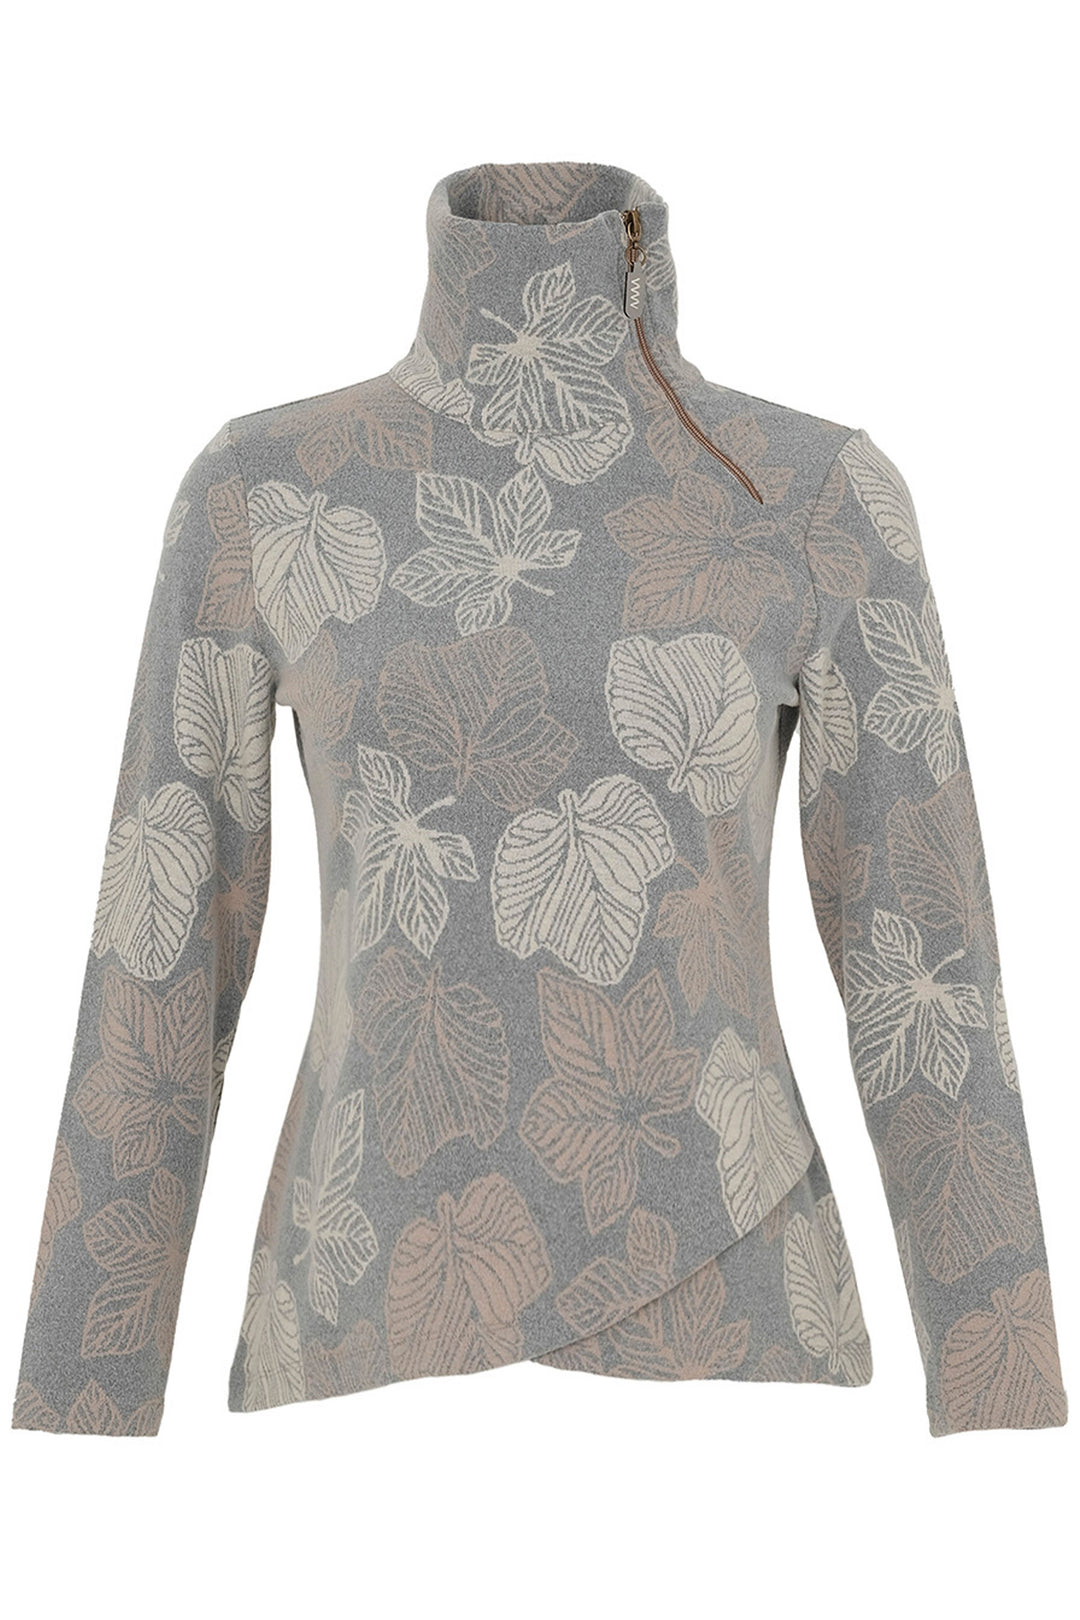 Crafted with a soft leaves print all-over and a luxurious funnel neck with a diagonal zipper, this top will make a statement.